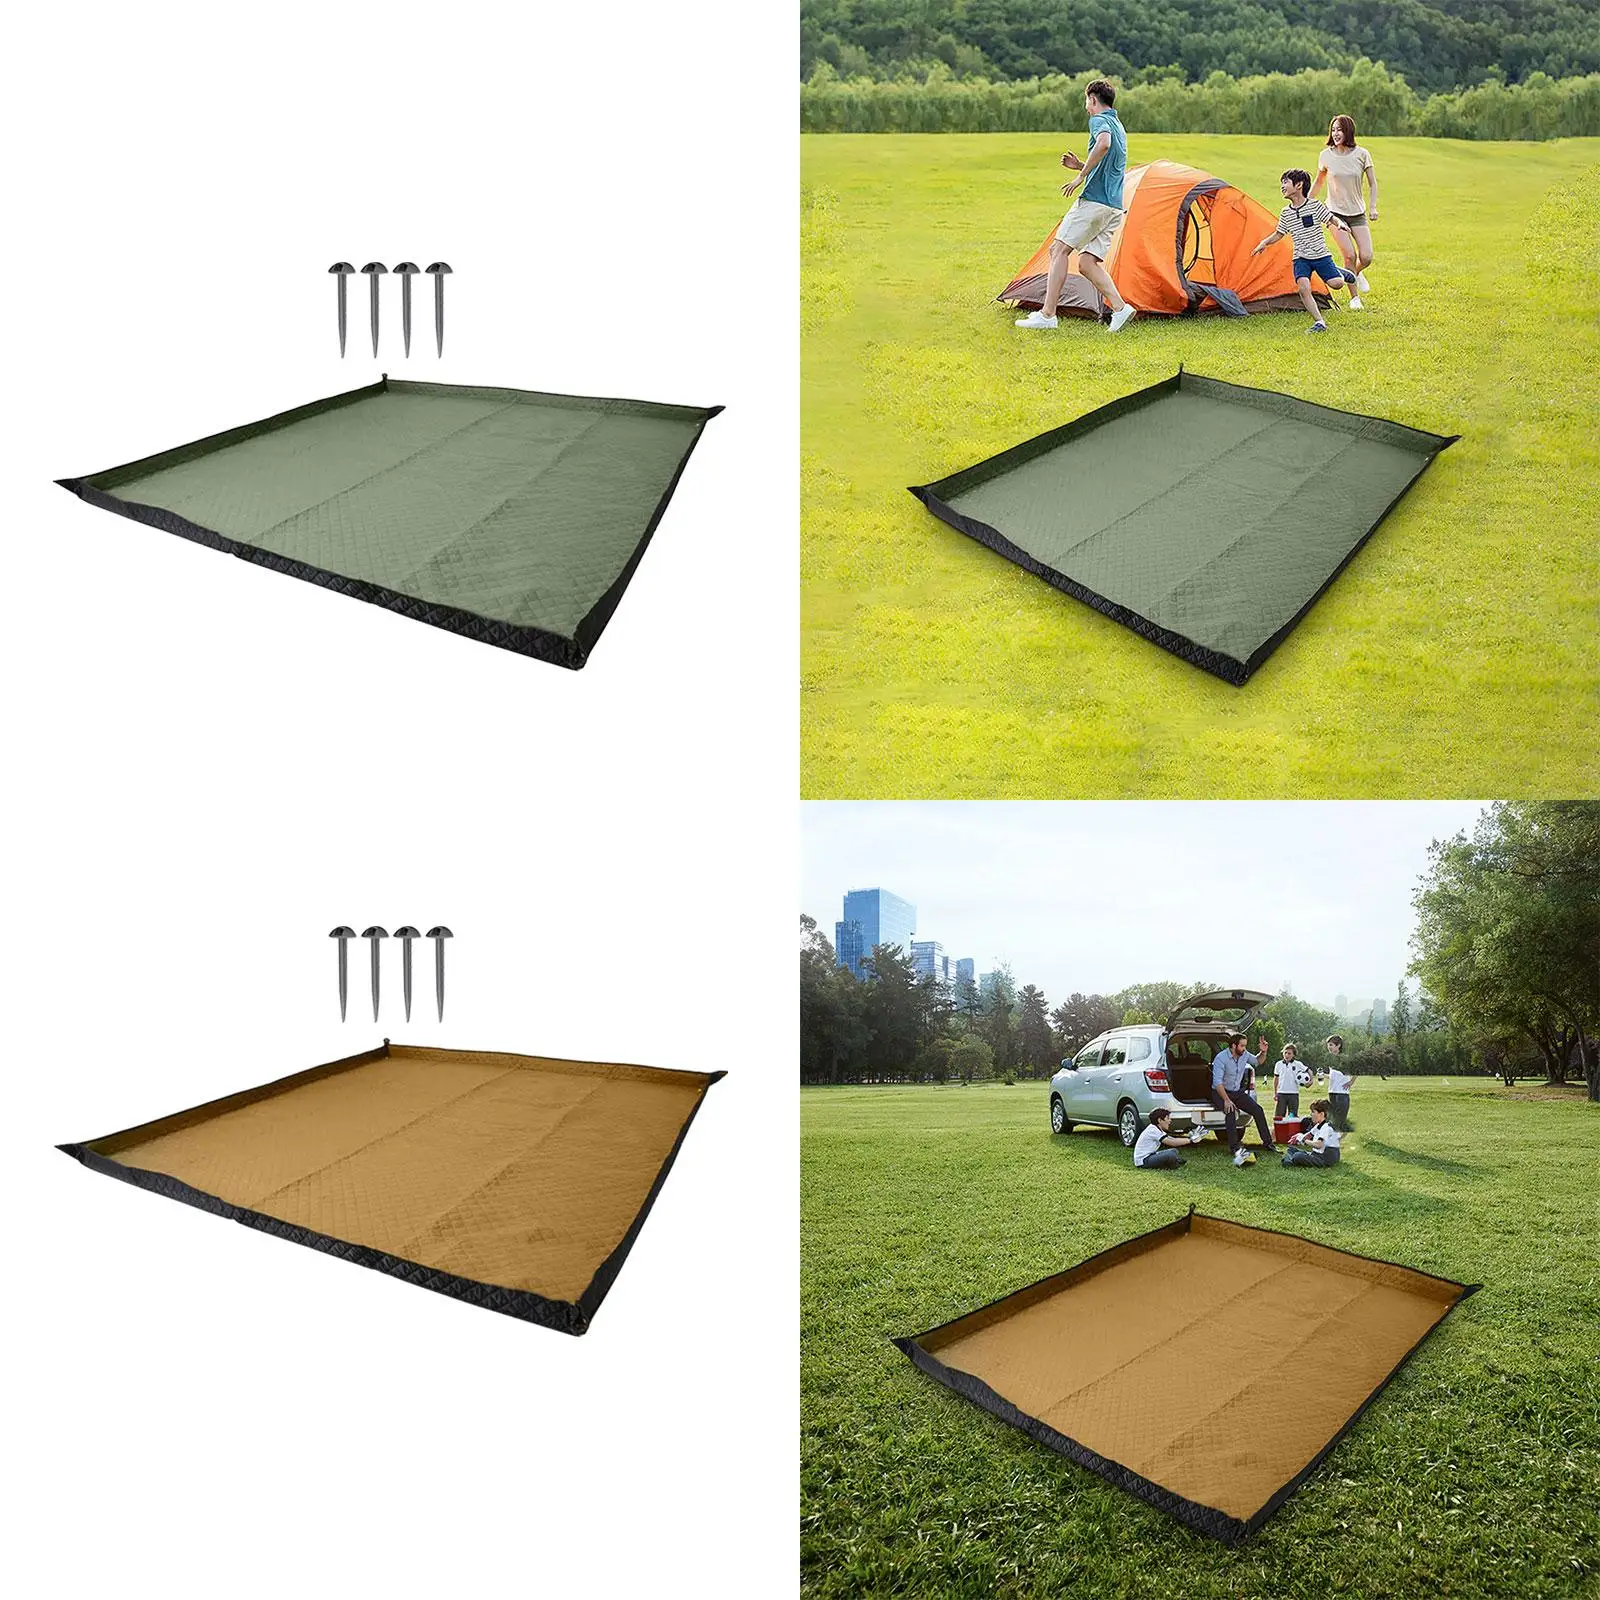 Tent Pad Picnic Blanket Wear Resistant Park Blanket Camping Blanket Sleeping Pad for Backpacking Family Concerts Party Hiking